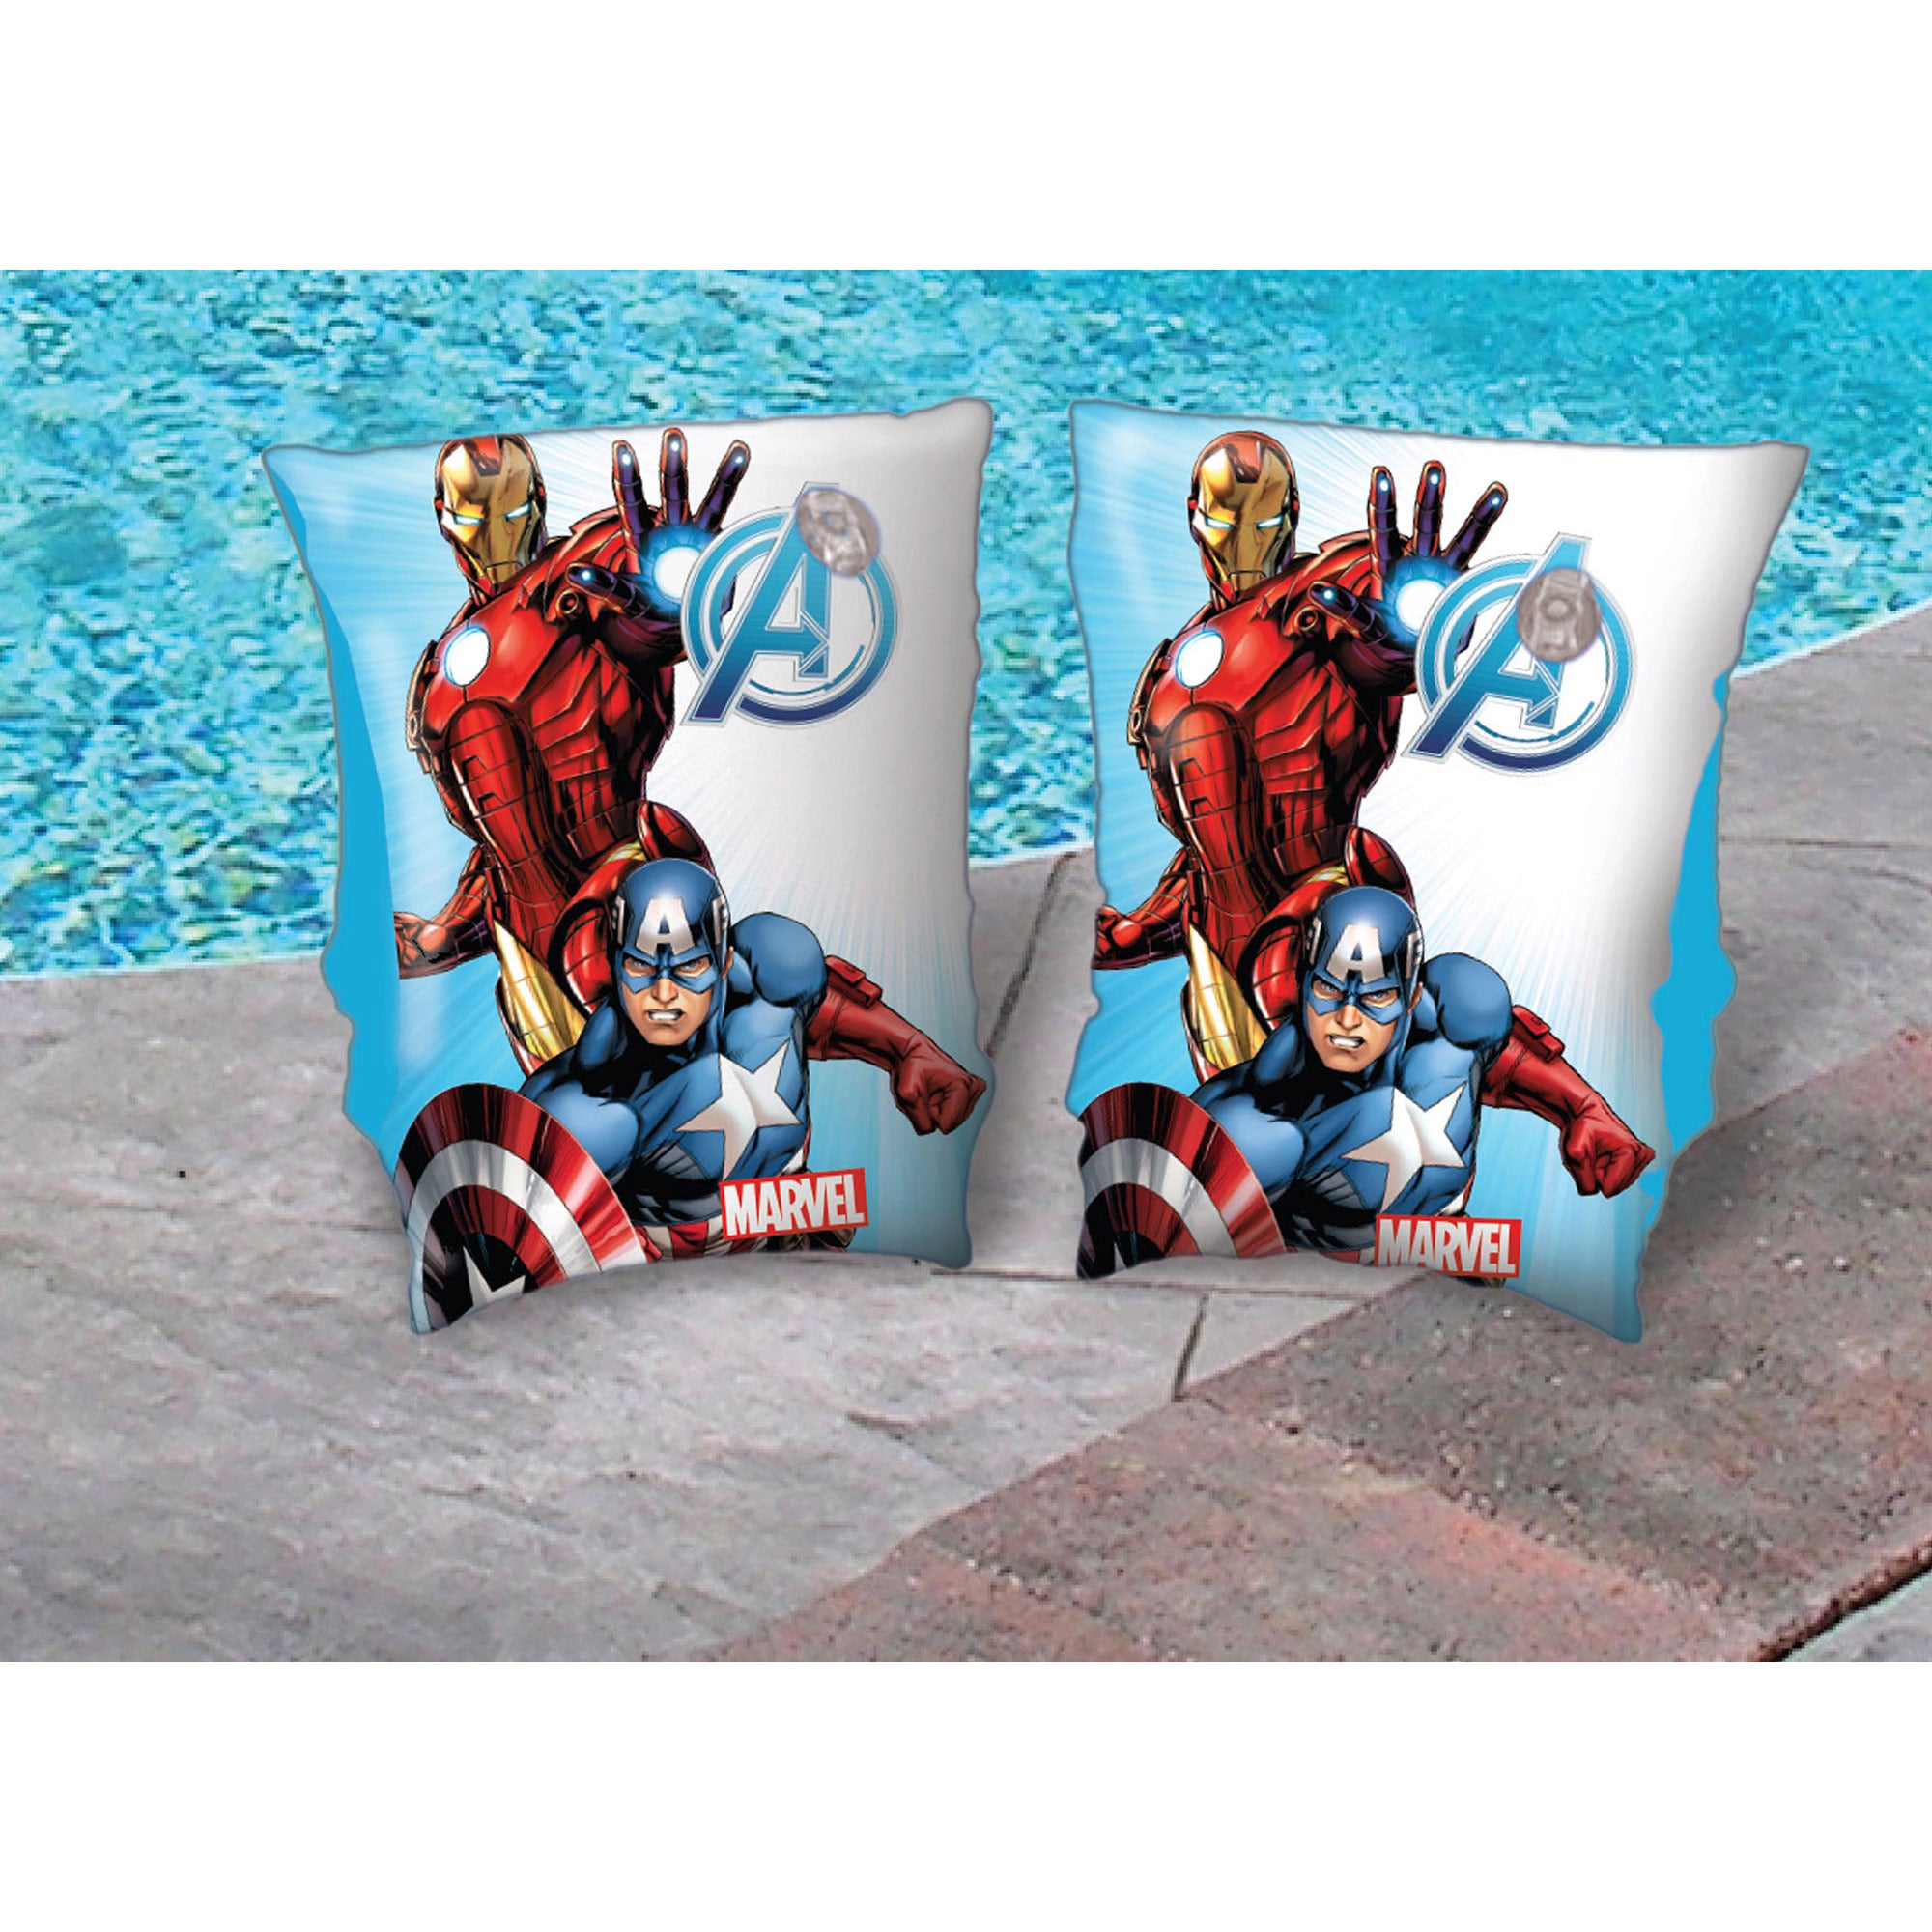 Marvel Avengers Inflatable Swimming Armbands, Floats Water Wings Arm Bands Floater Sleeves Swimming, Armlets for Kids || 3-8 Years - Toys4All.in